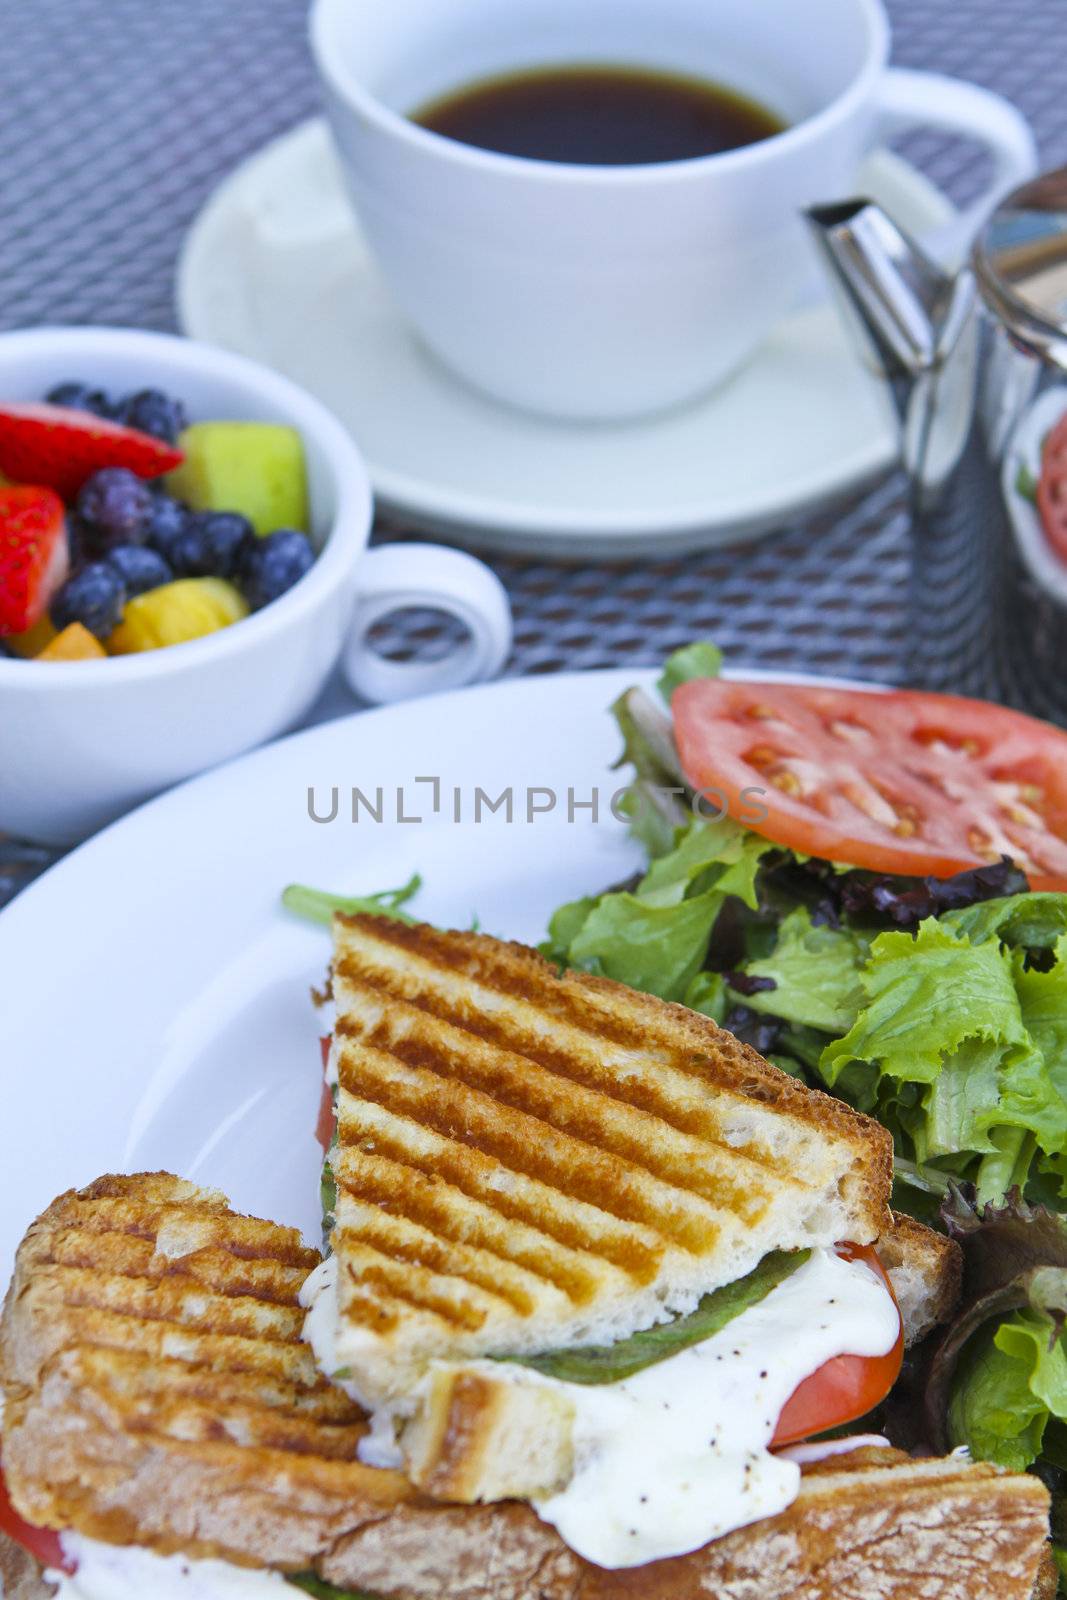 Panini breakfast with complimenting fruits and tea on white plates.